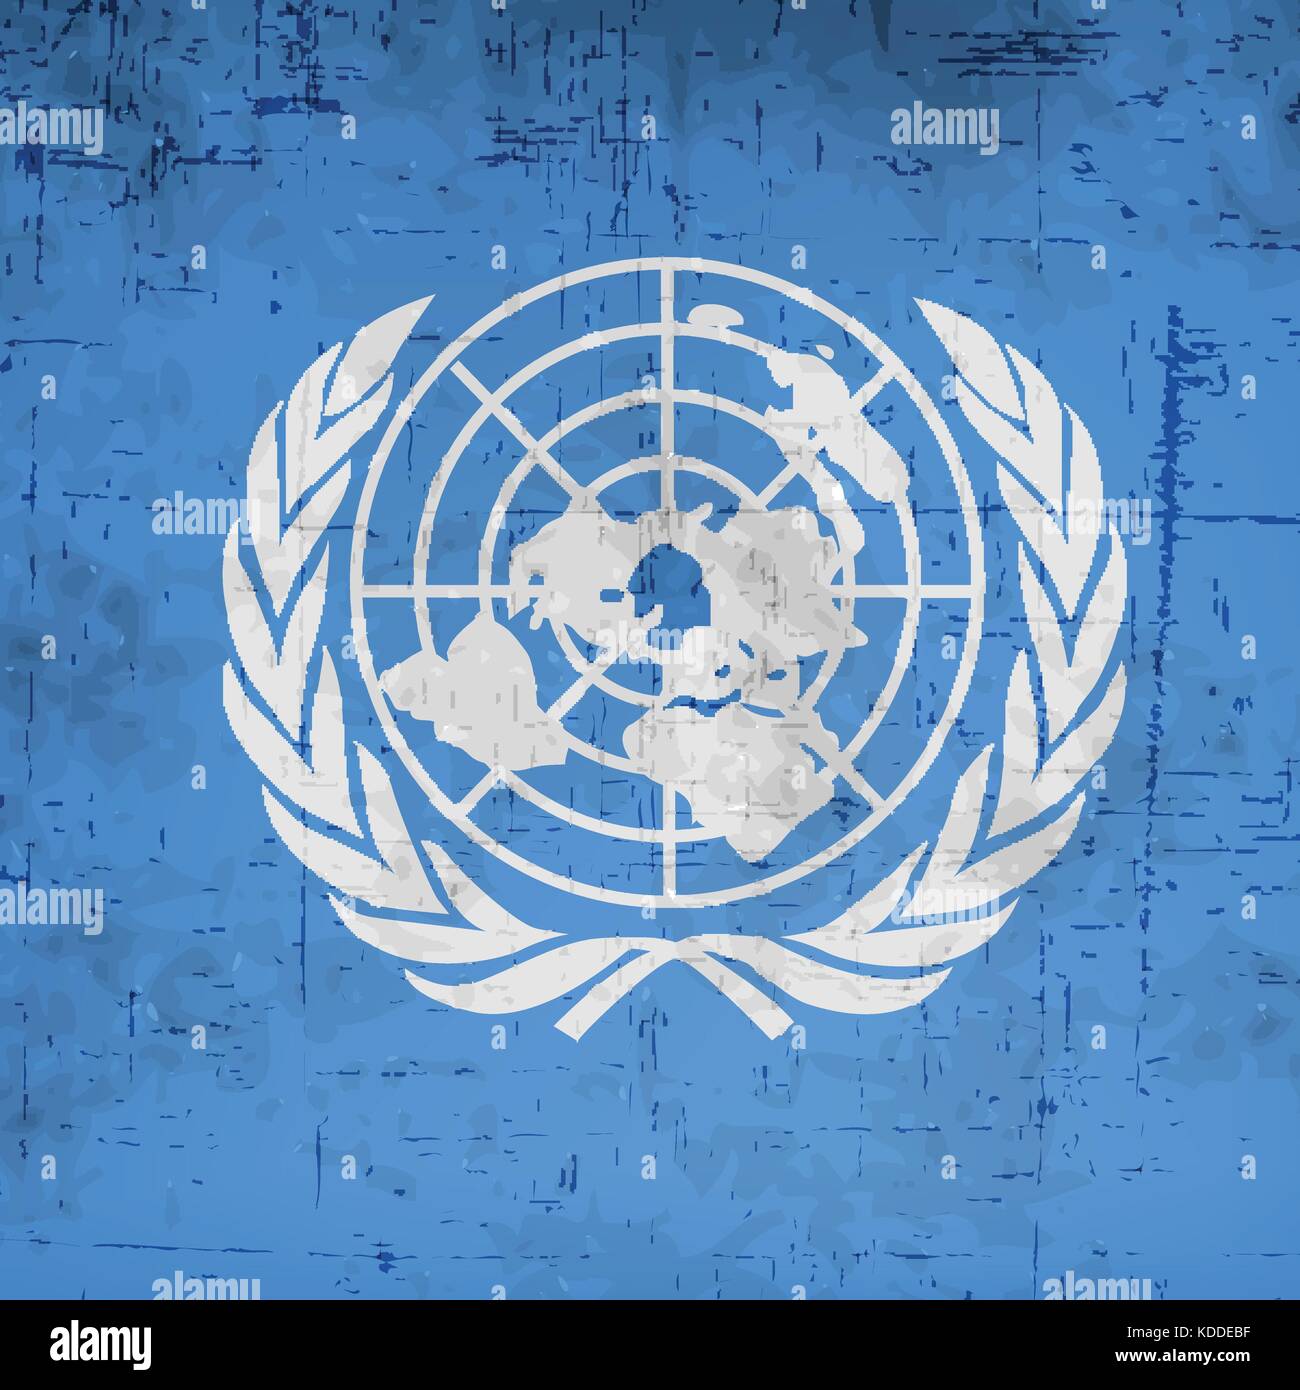 illustration of United Nations Day Background Stock Vector Image & Art -  Alamy